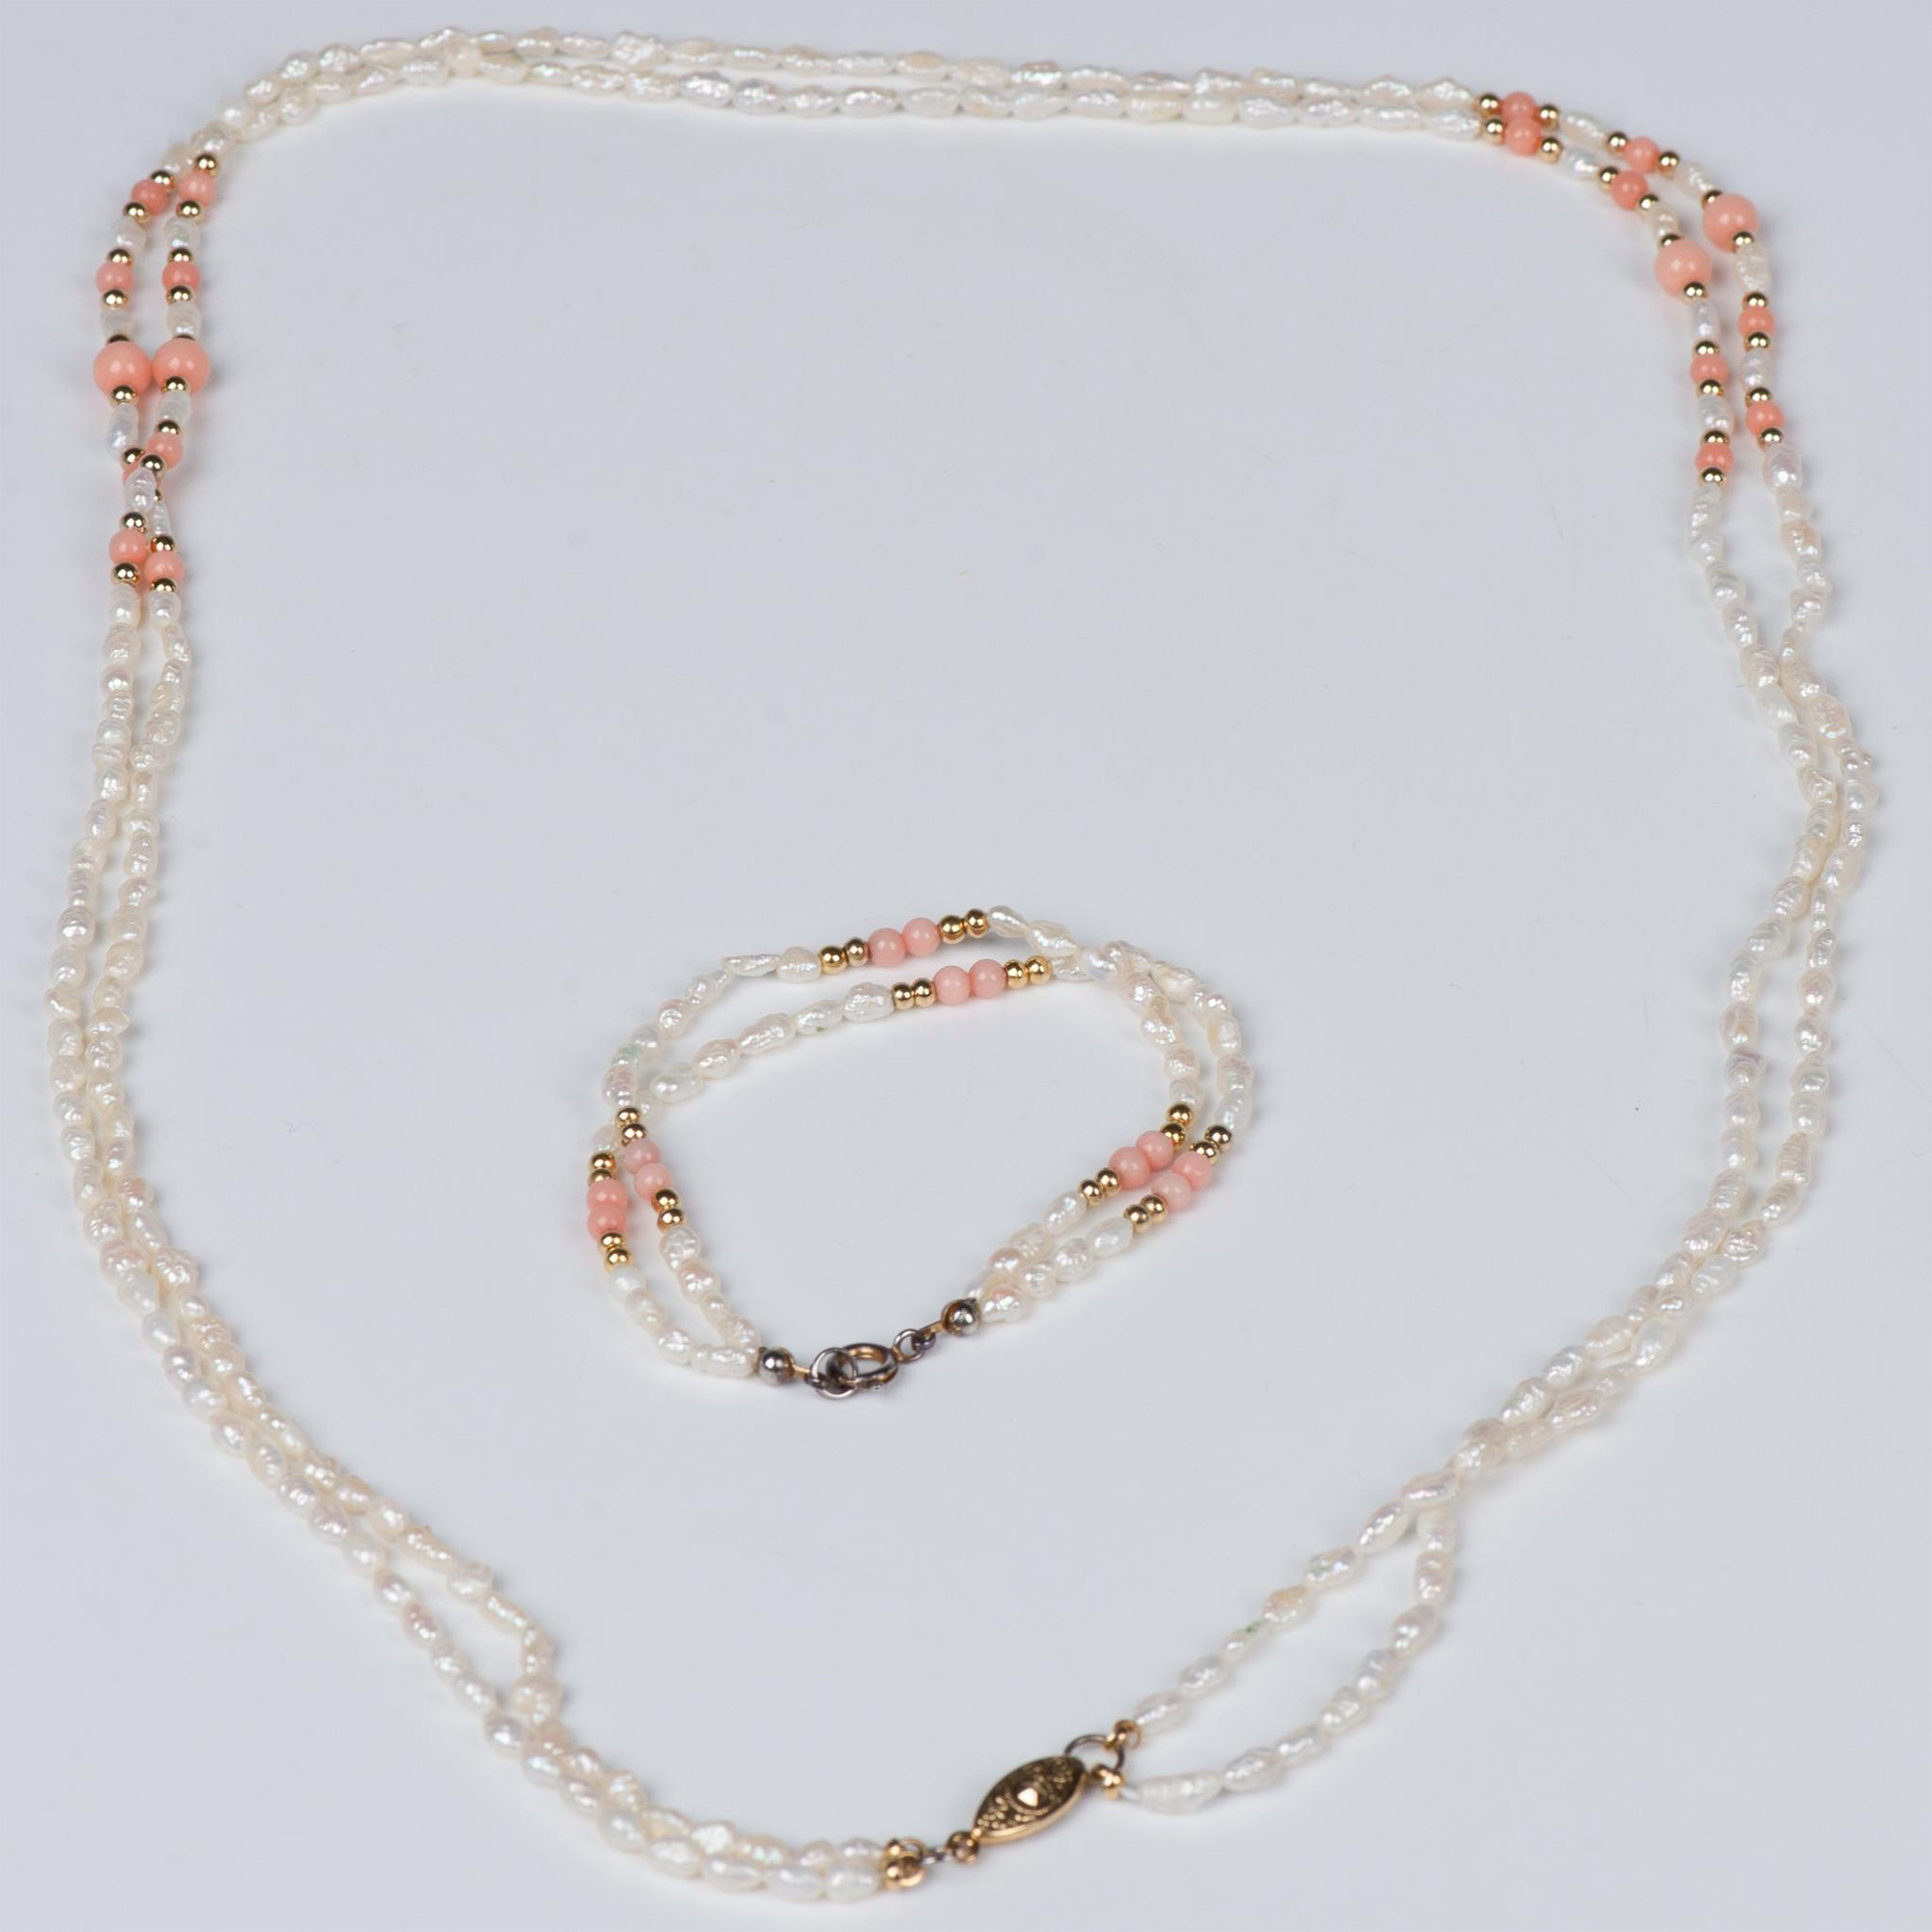 2pc Pretty Baroque Pearl & Pink Coral Necklace and Bracelet - Image 2 of 3